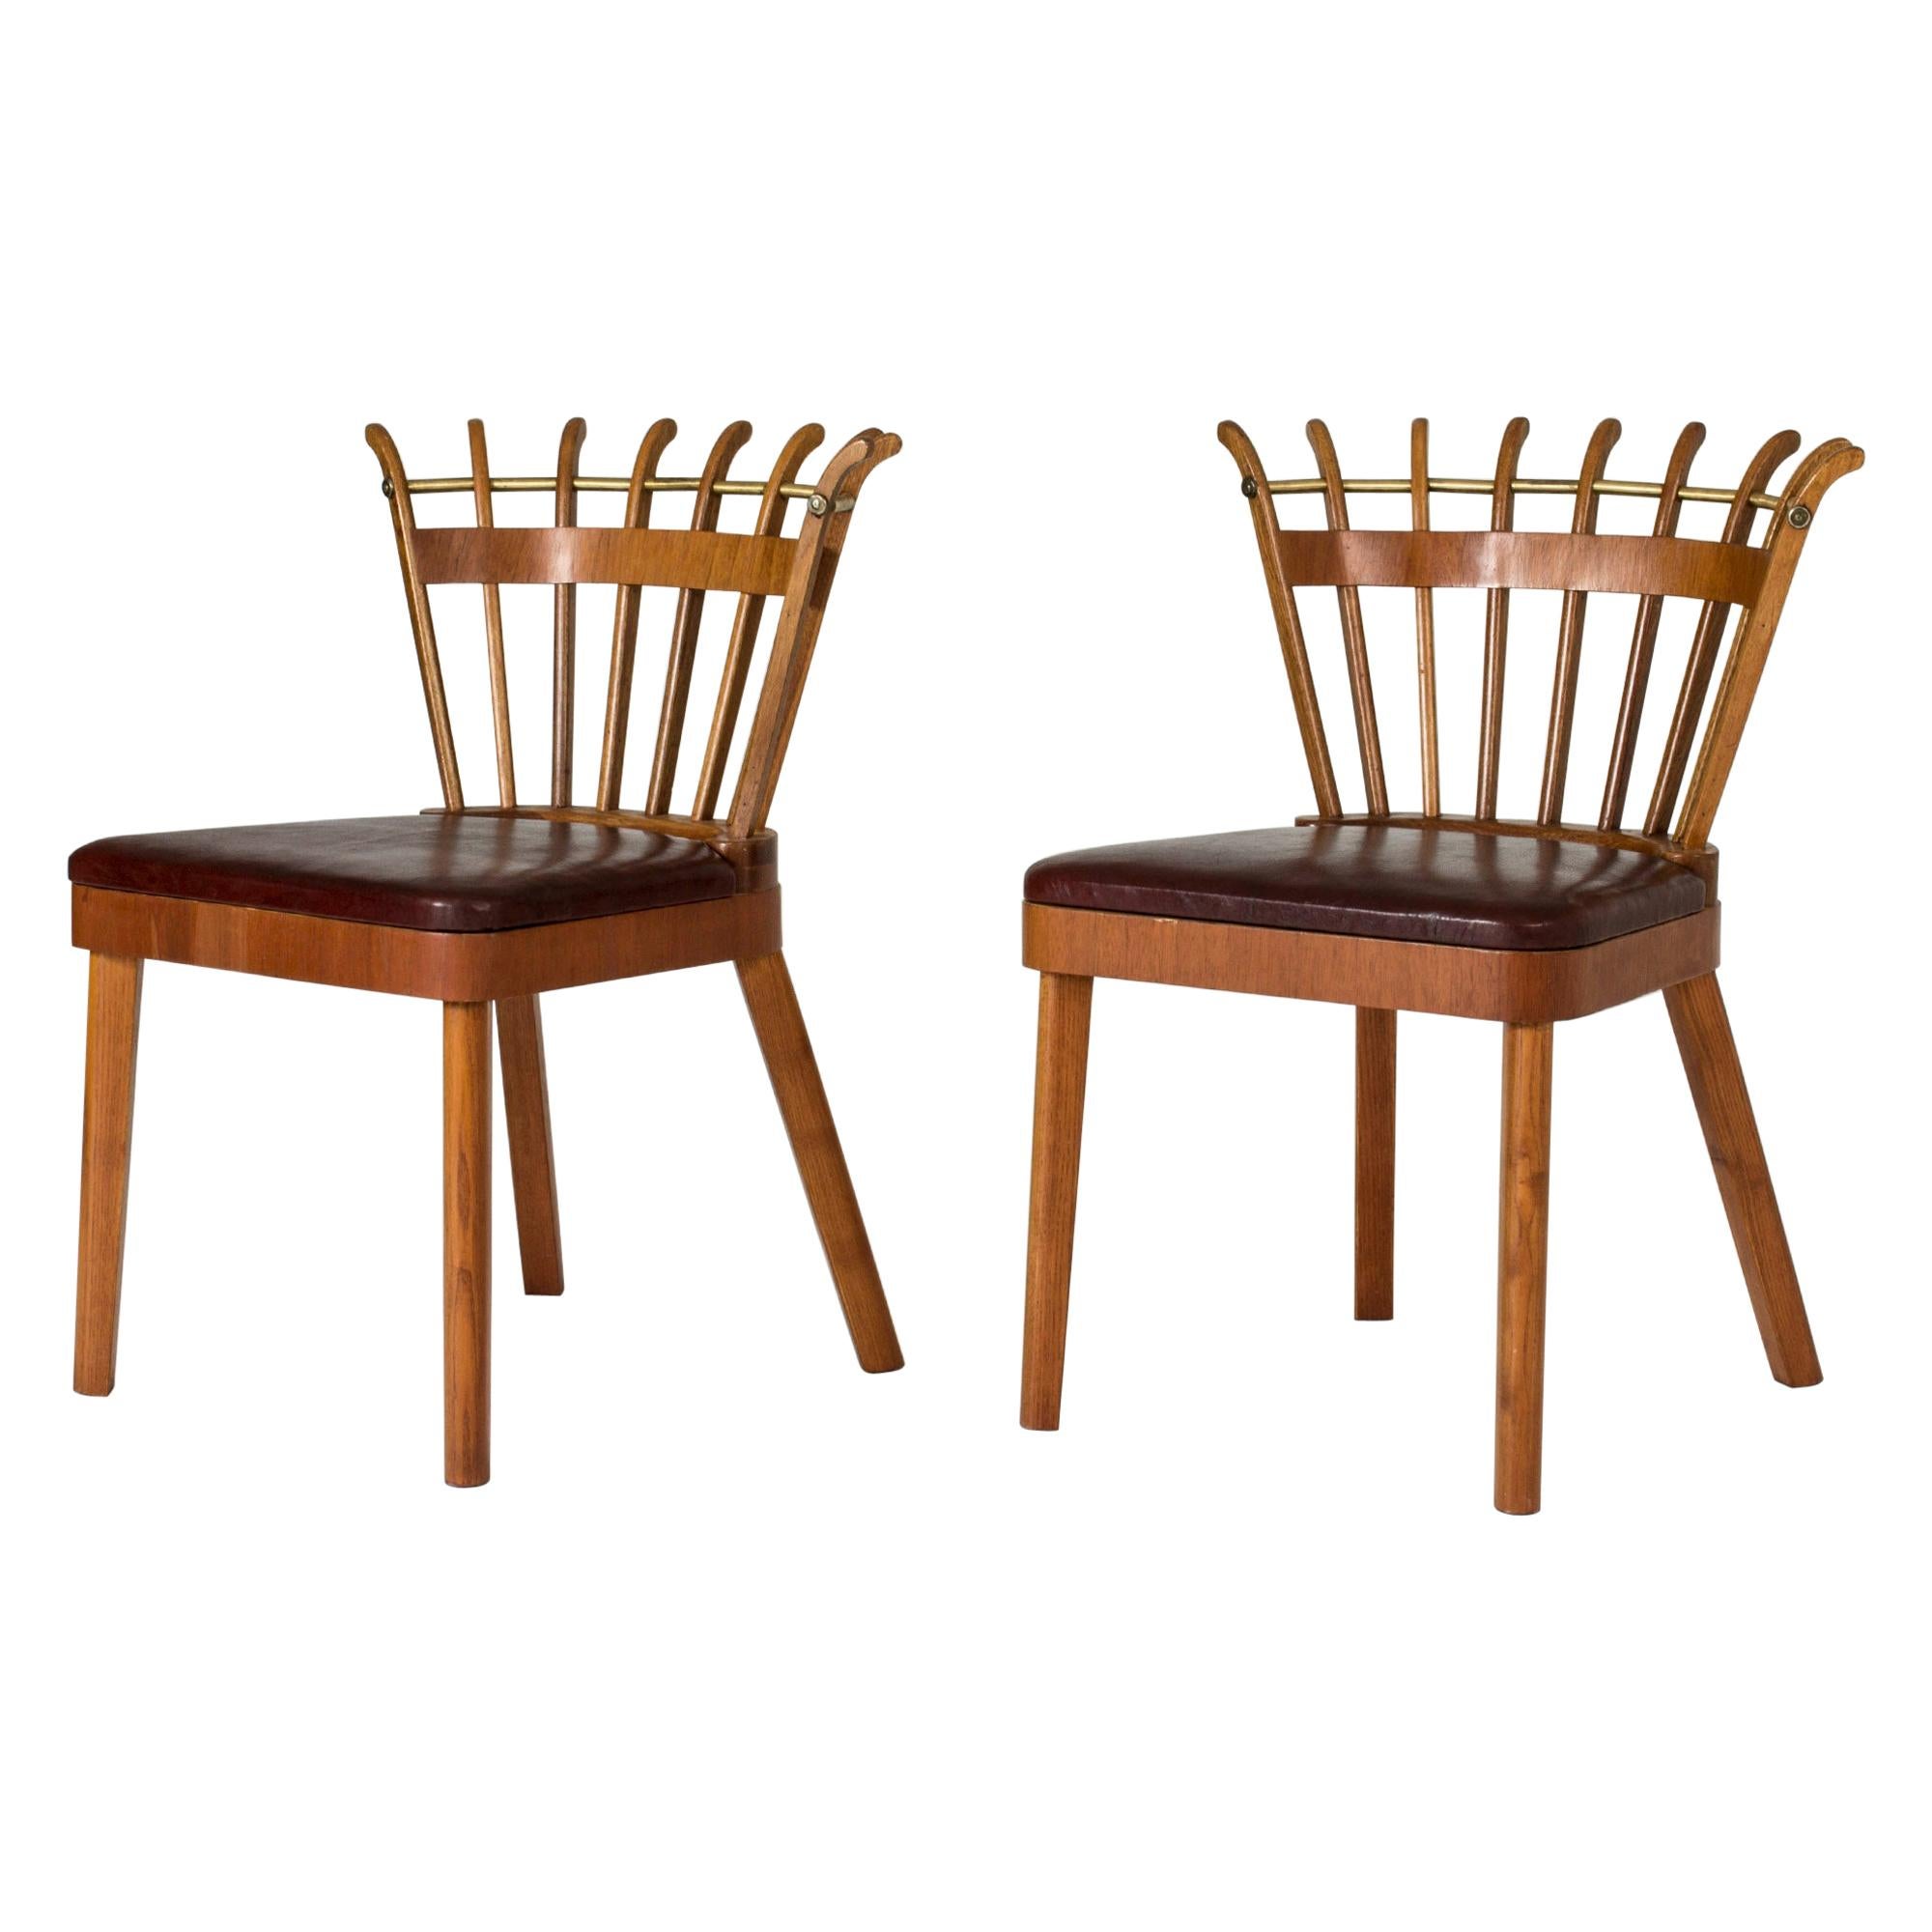 Pair of Swedish Modern Occasional Chairs, Sweden, 1946